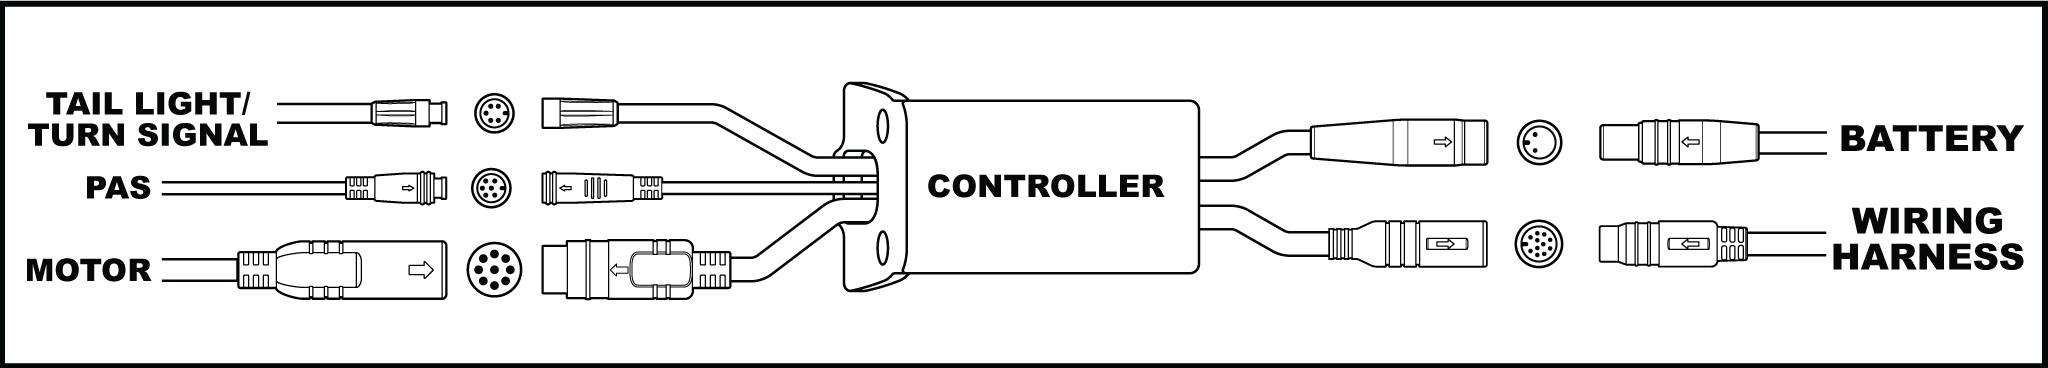 RADster_ControllerConnections.png